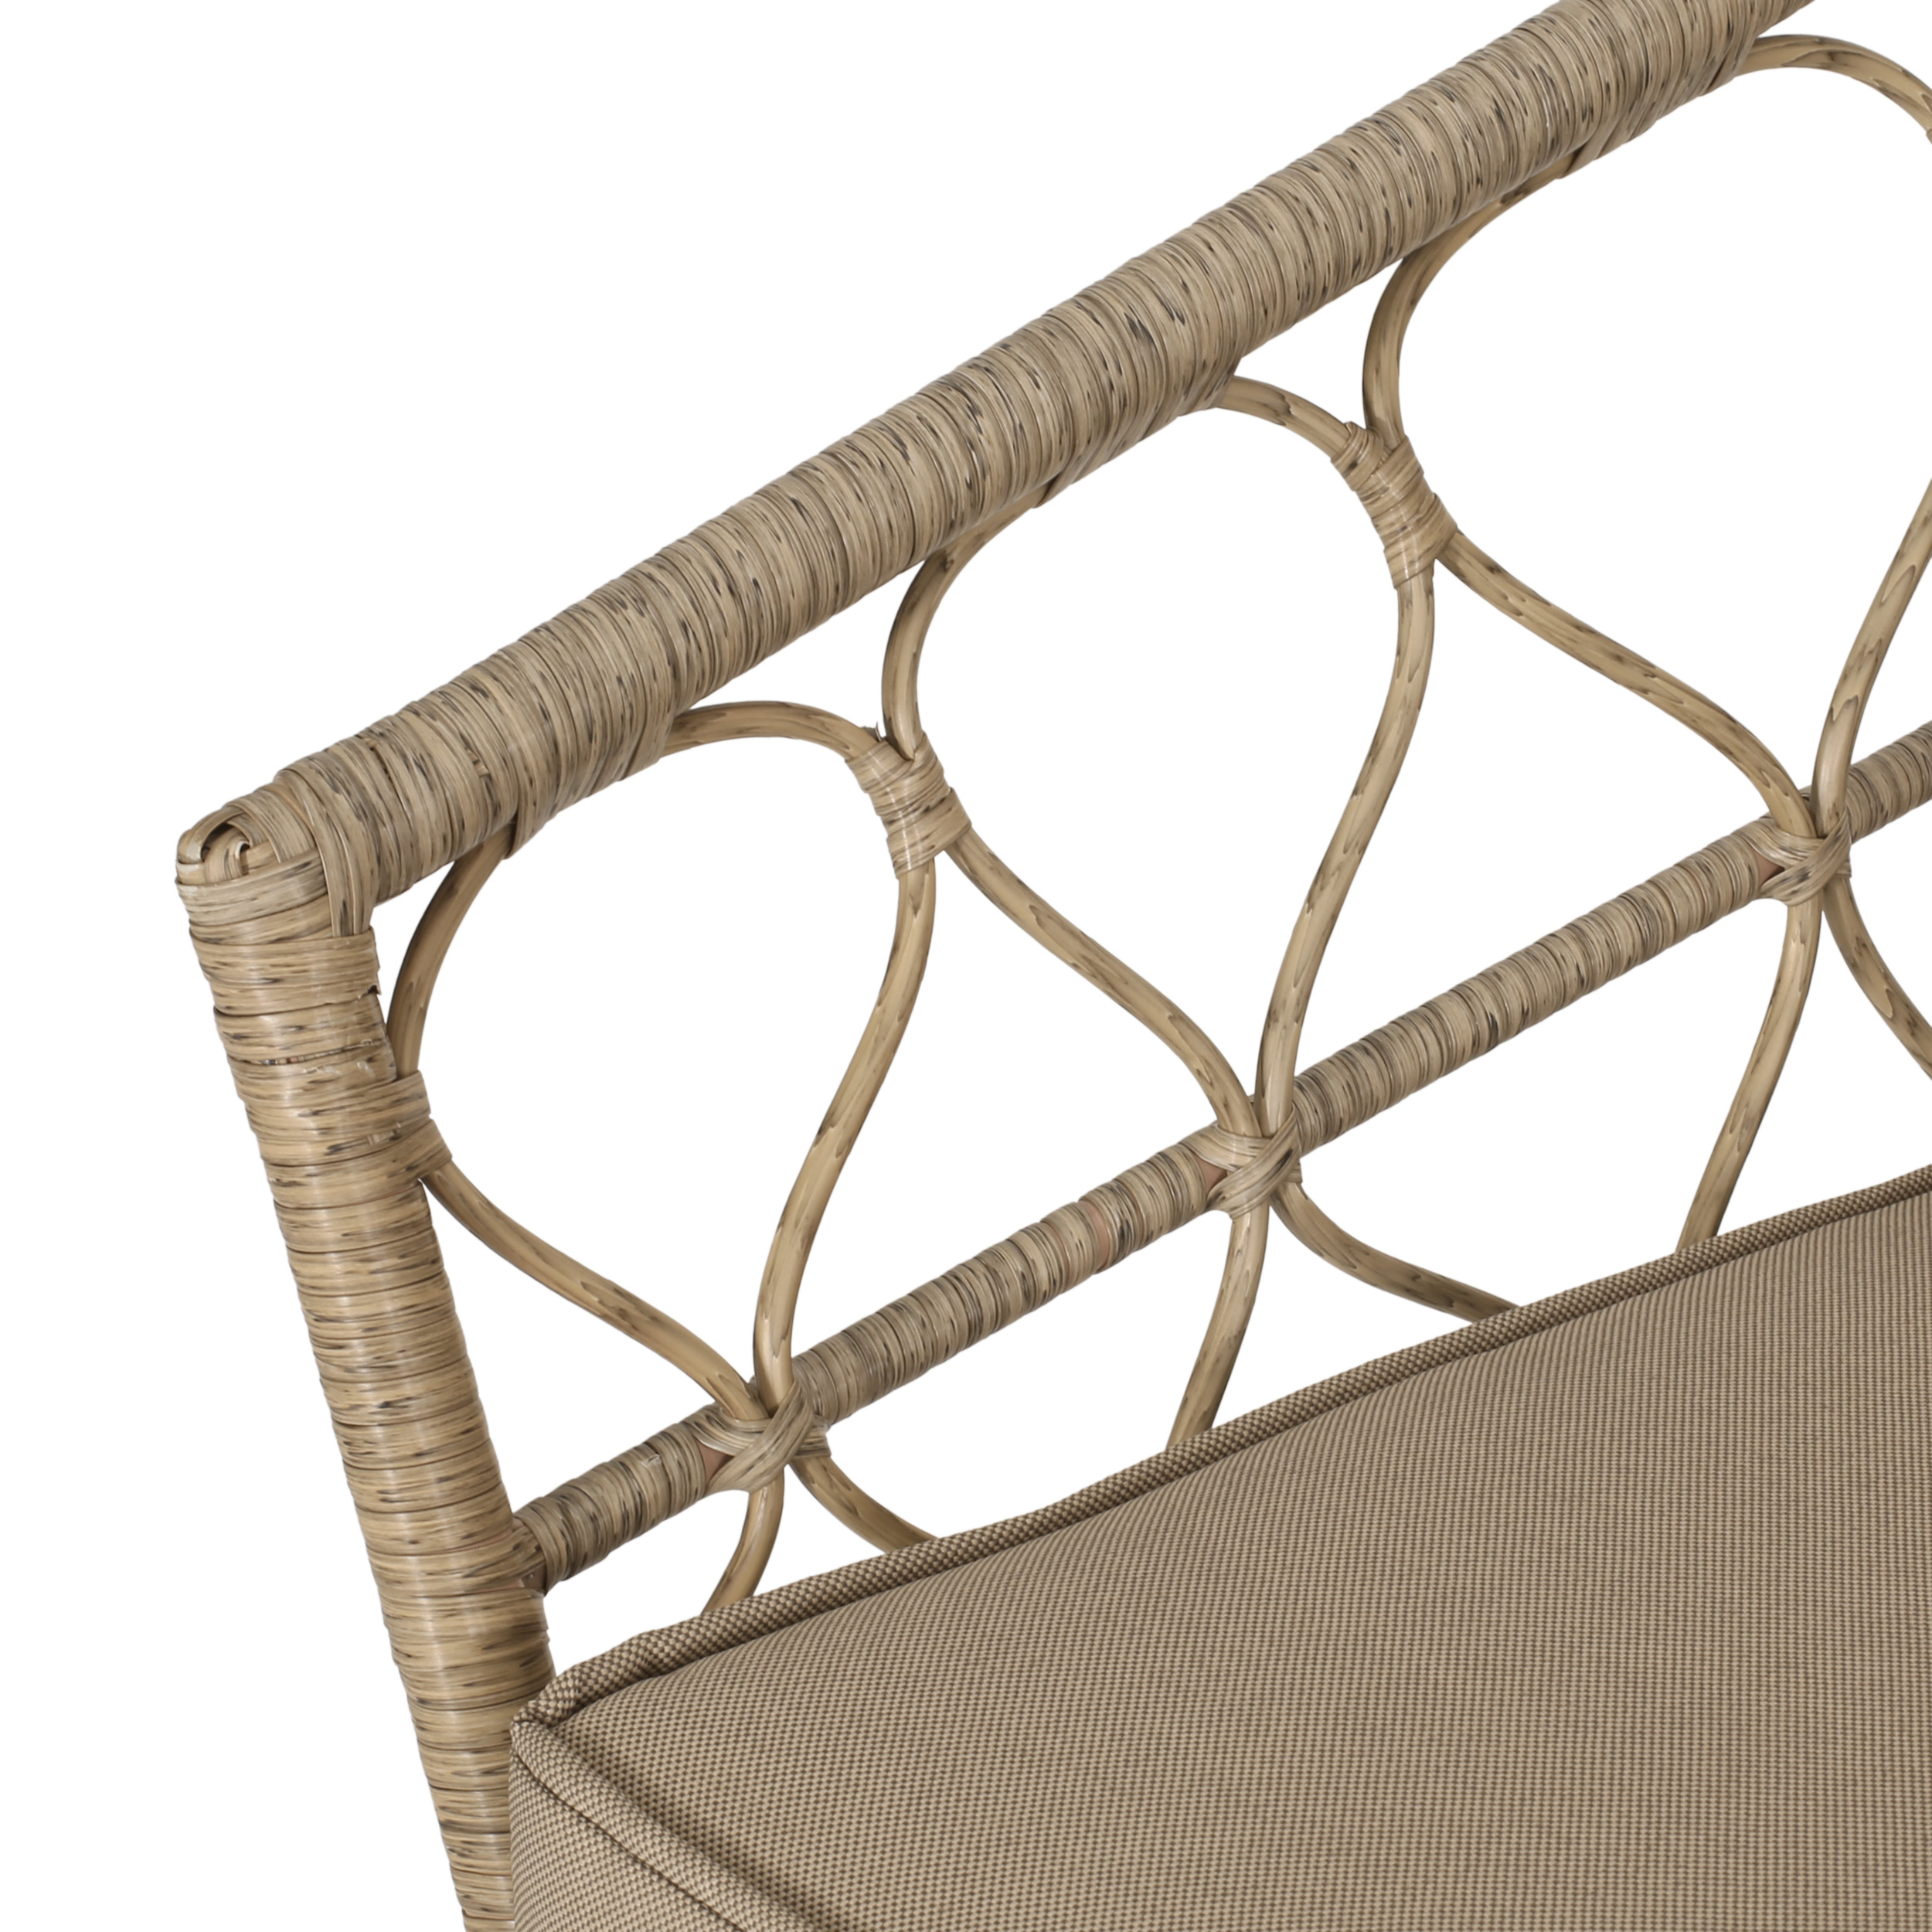 GDF Studio Colmar Outdoor Wicker 3 Piece Chat Set with Cushions, Light Brown and Beige - image 4 of 8